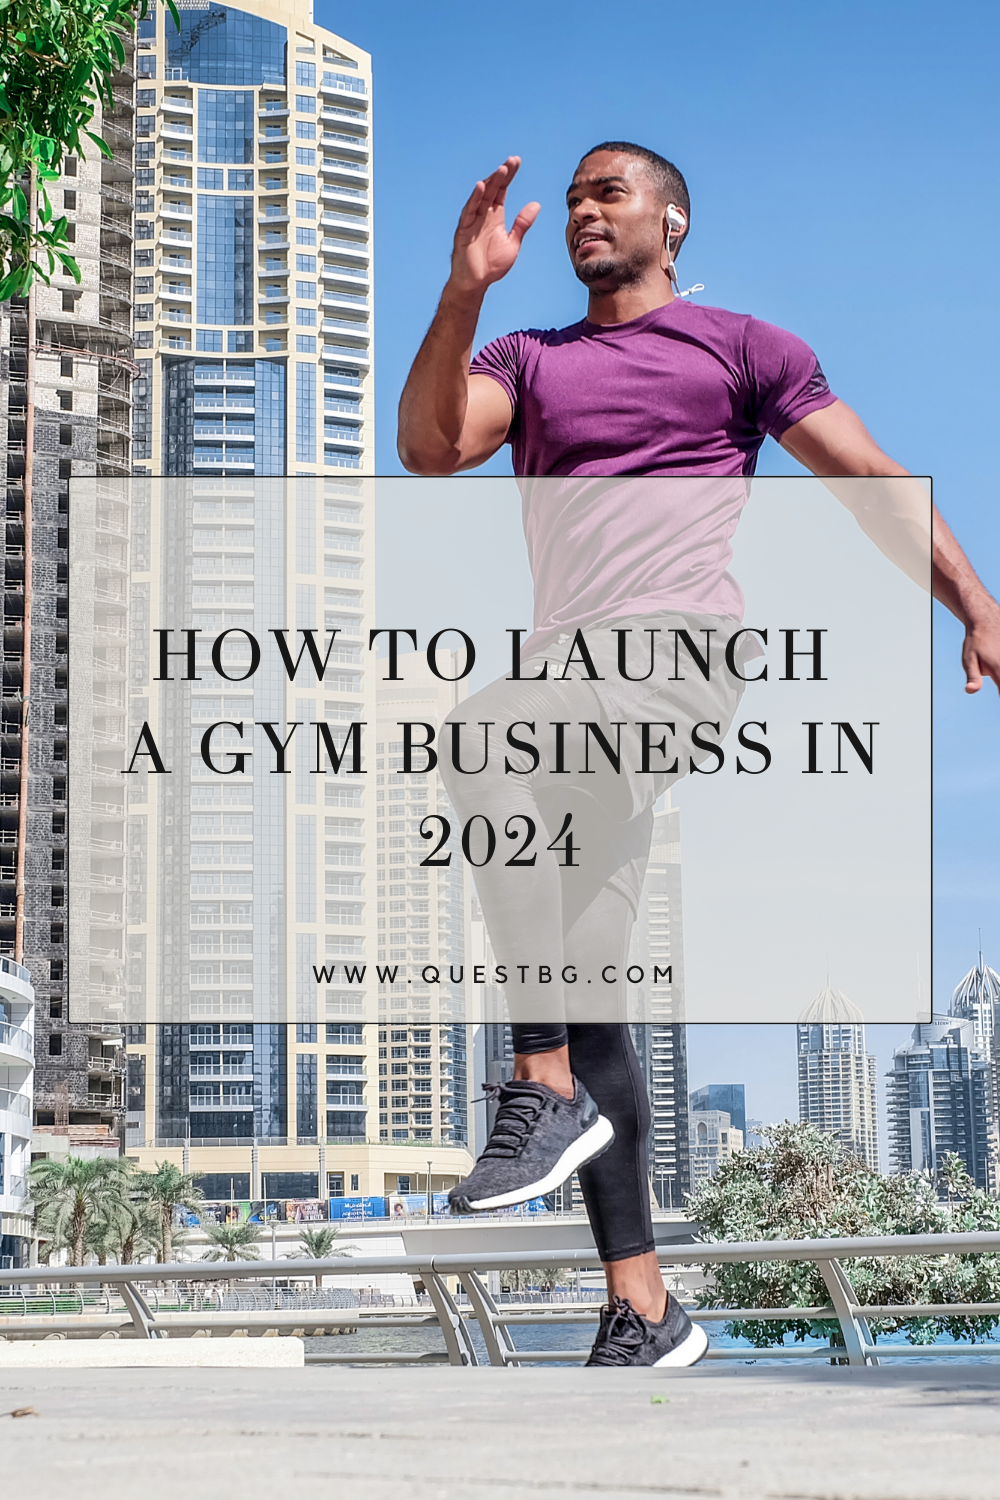 How to Launch a Gym Business in 2024